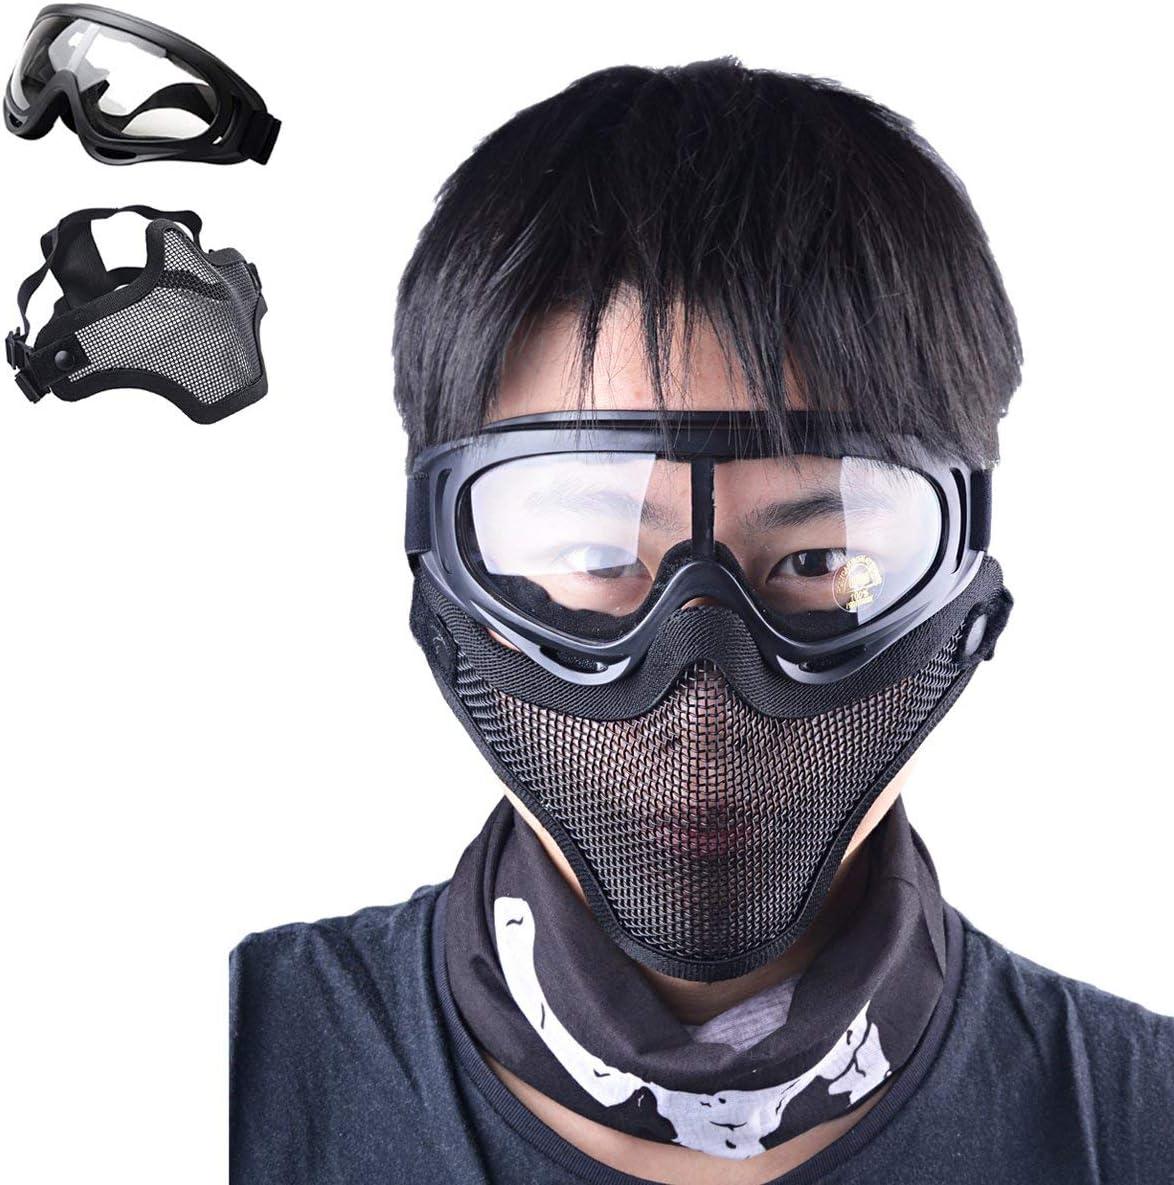 Outgeek Airsoft Mask Full Face Mask with Steel Mesh